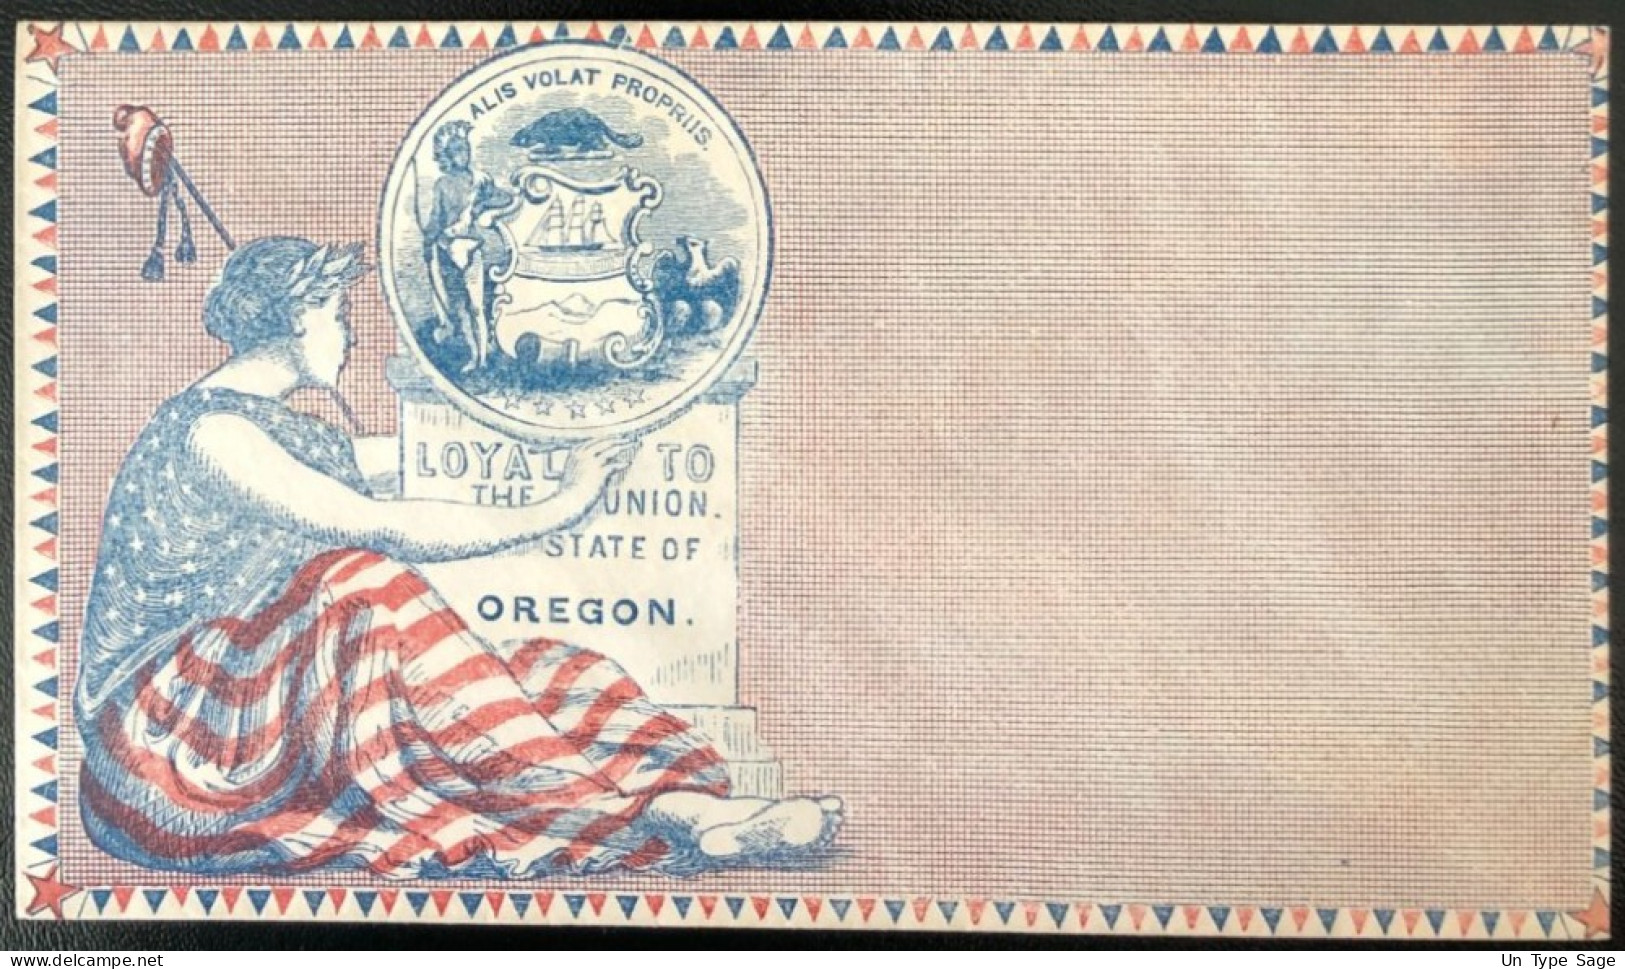 U.S.A, Civil War, Patriotic Cover - "Loyal To The Union. State Of OREGON" - Unused - (C455) - Postal History